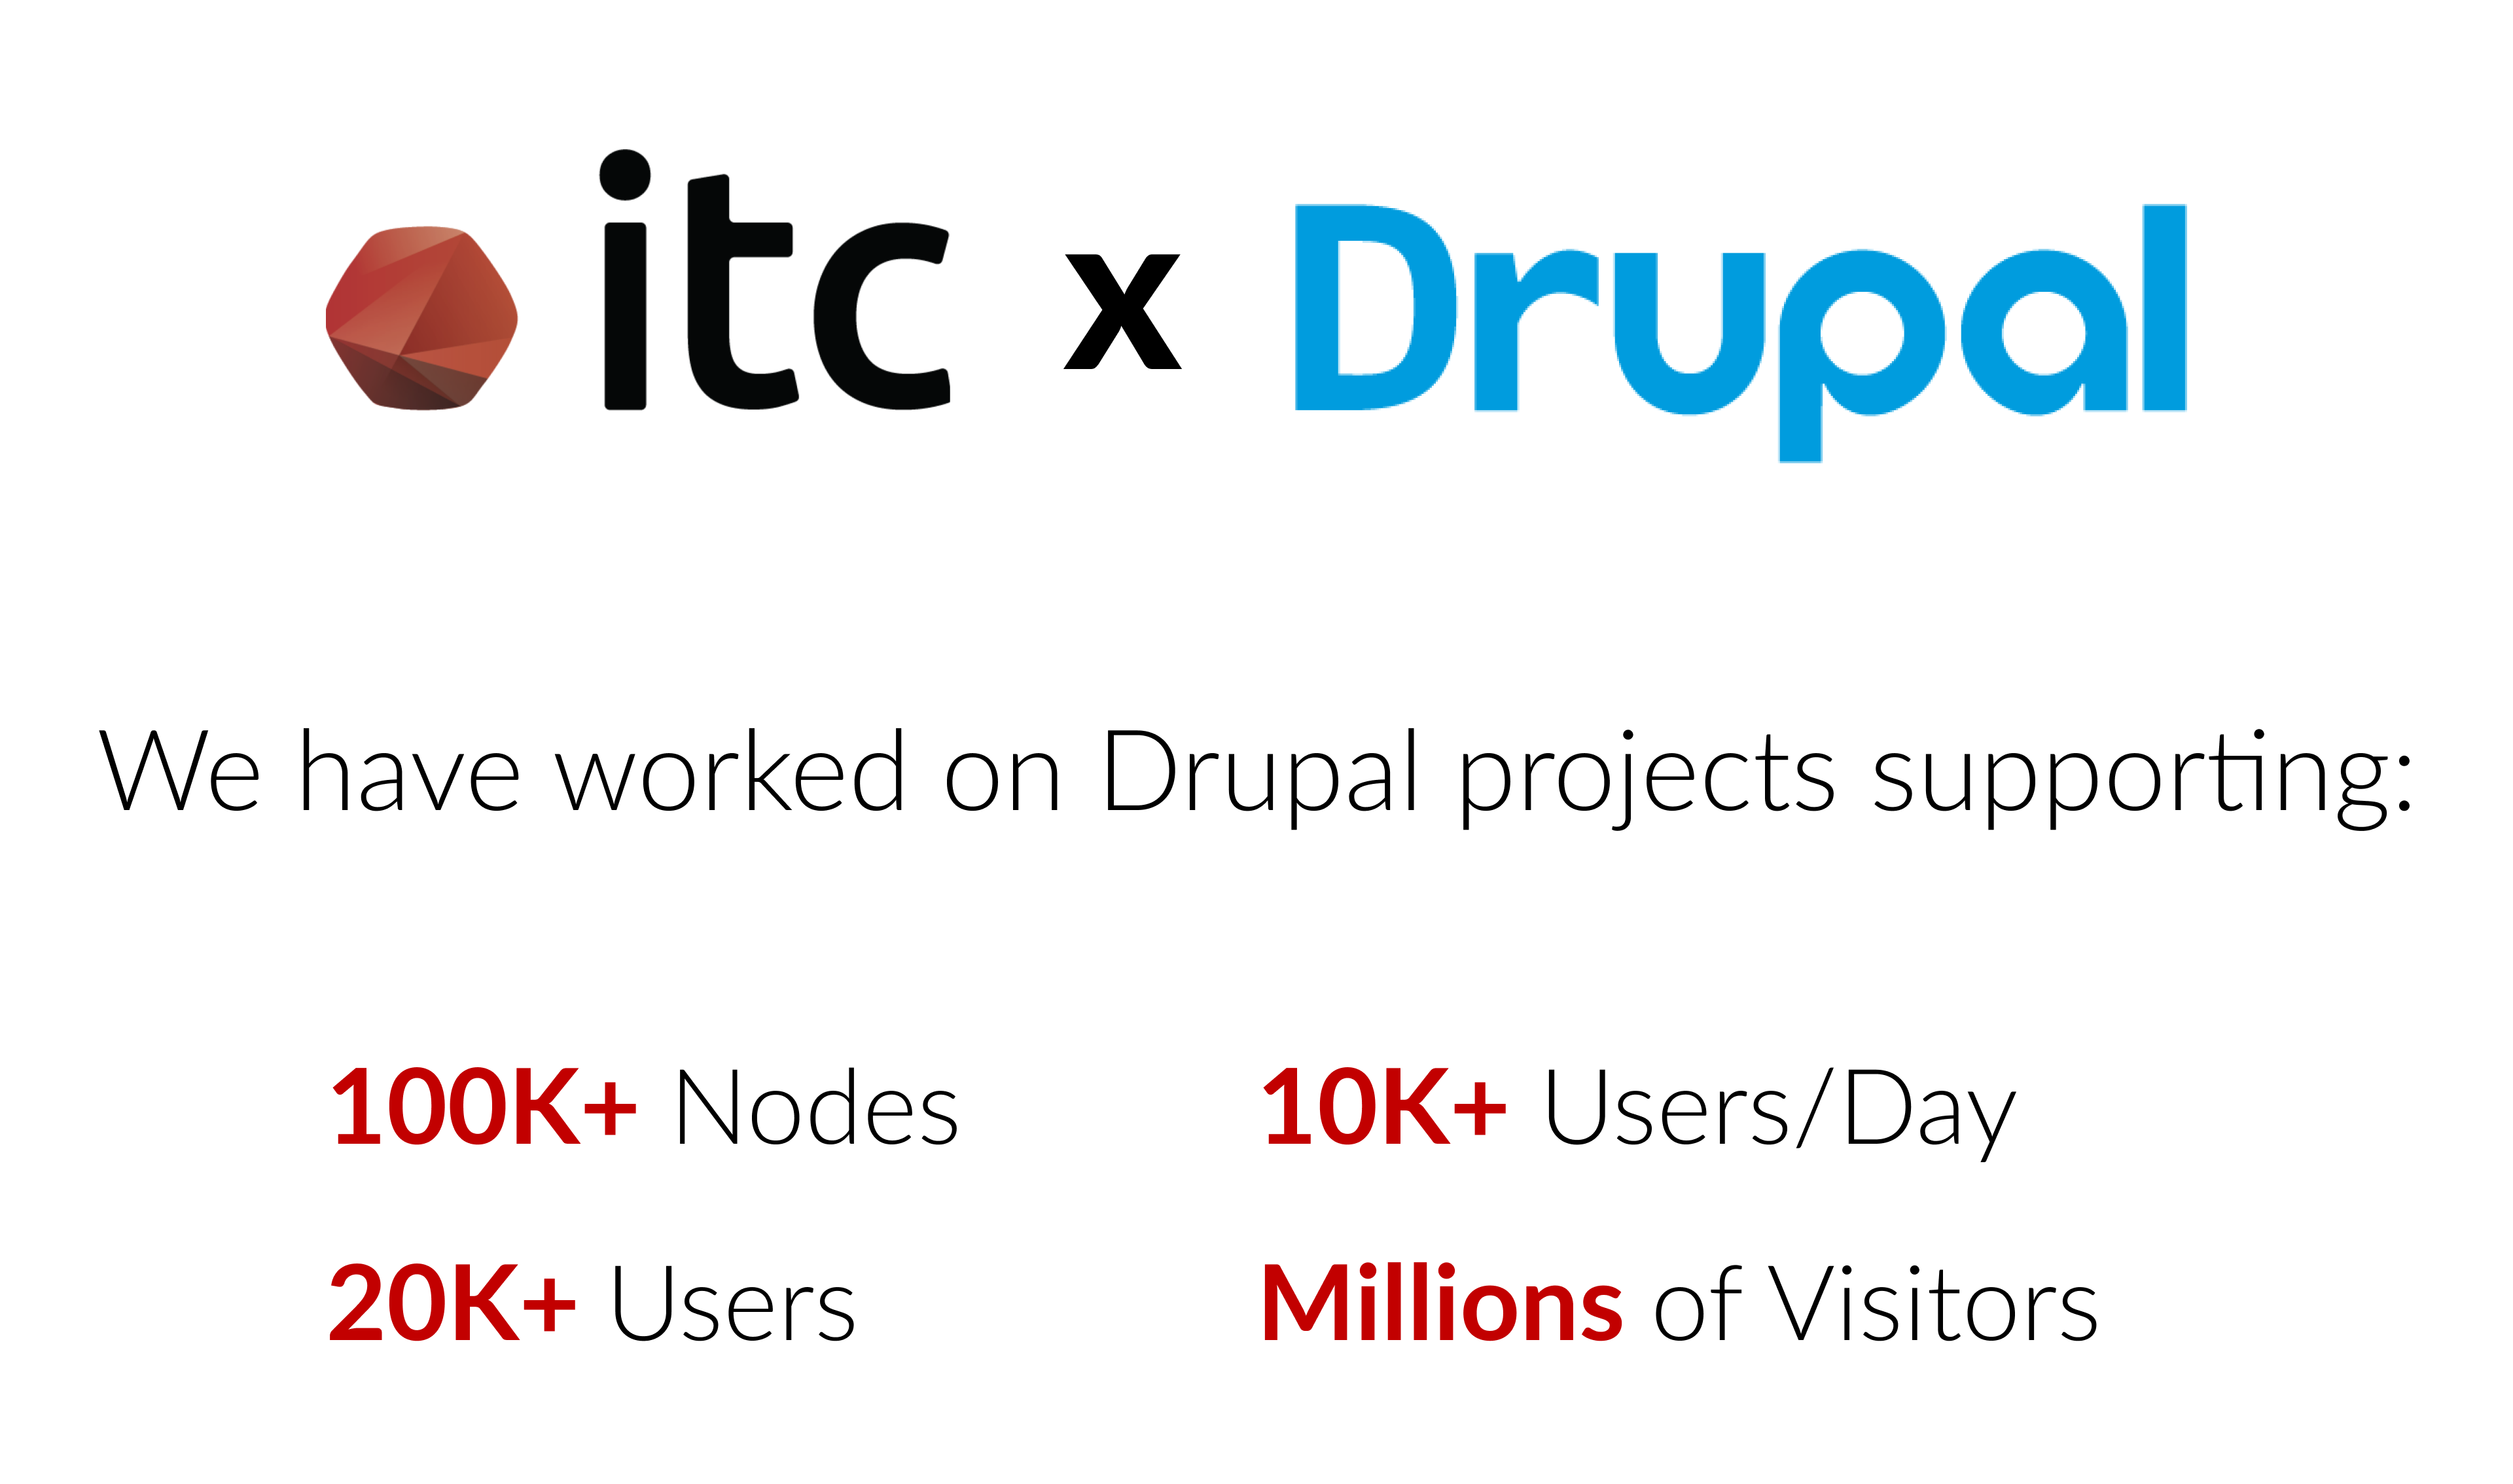 ITC has worked on Drupal projects supporting 100,000+ Nodes, 20,000+ Users, 10,000+ Users per Day, and Millions of Visitors